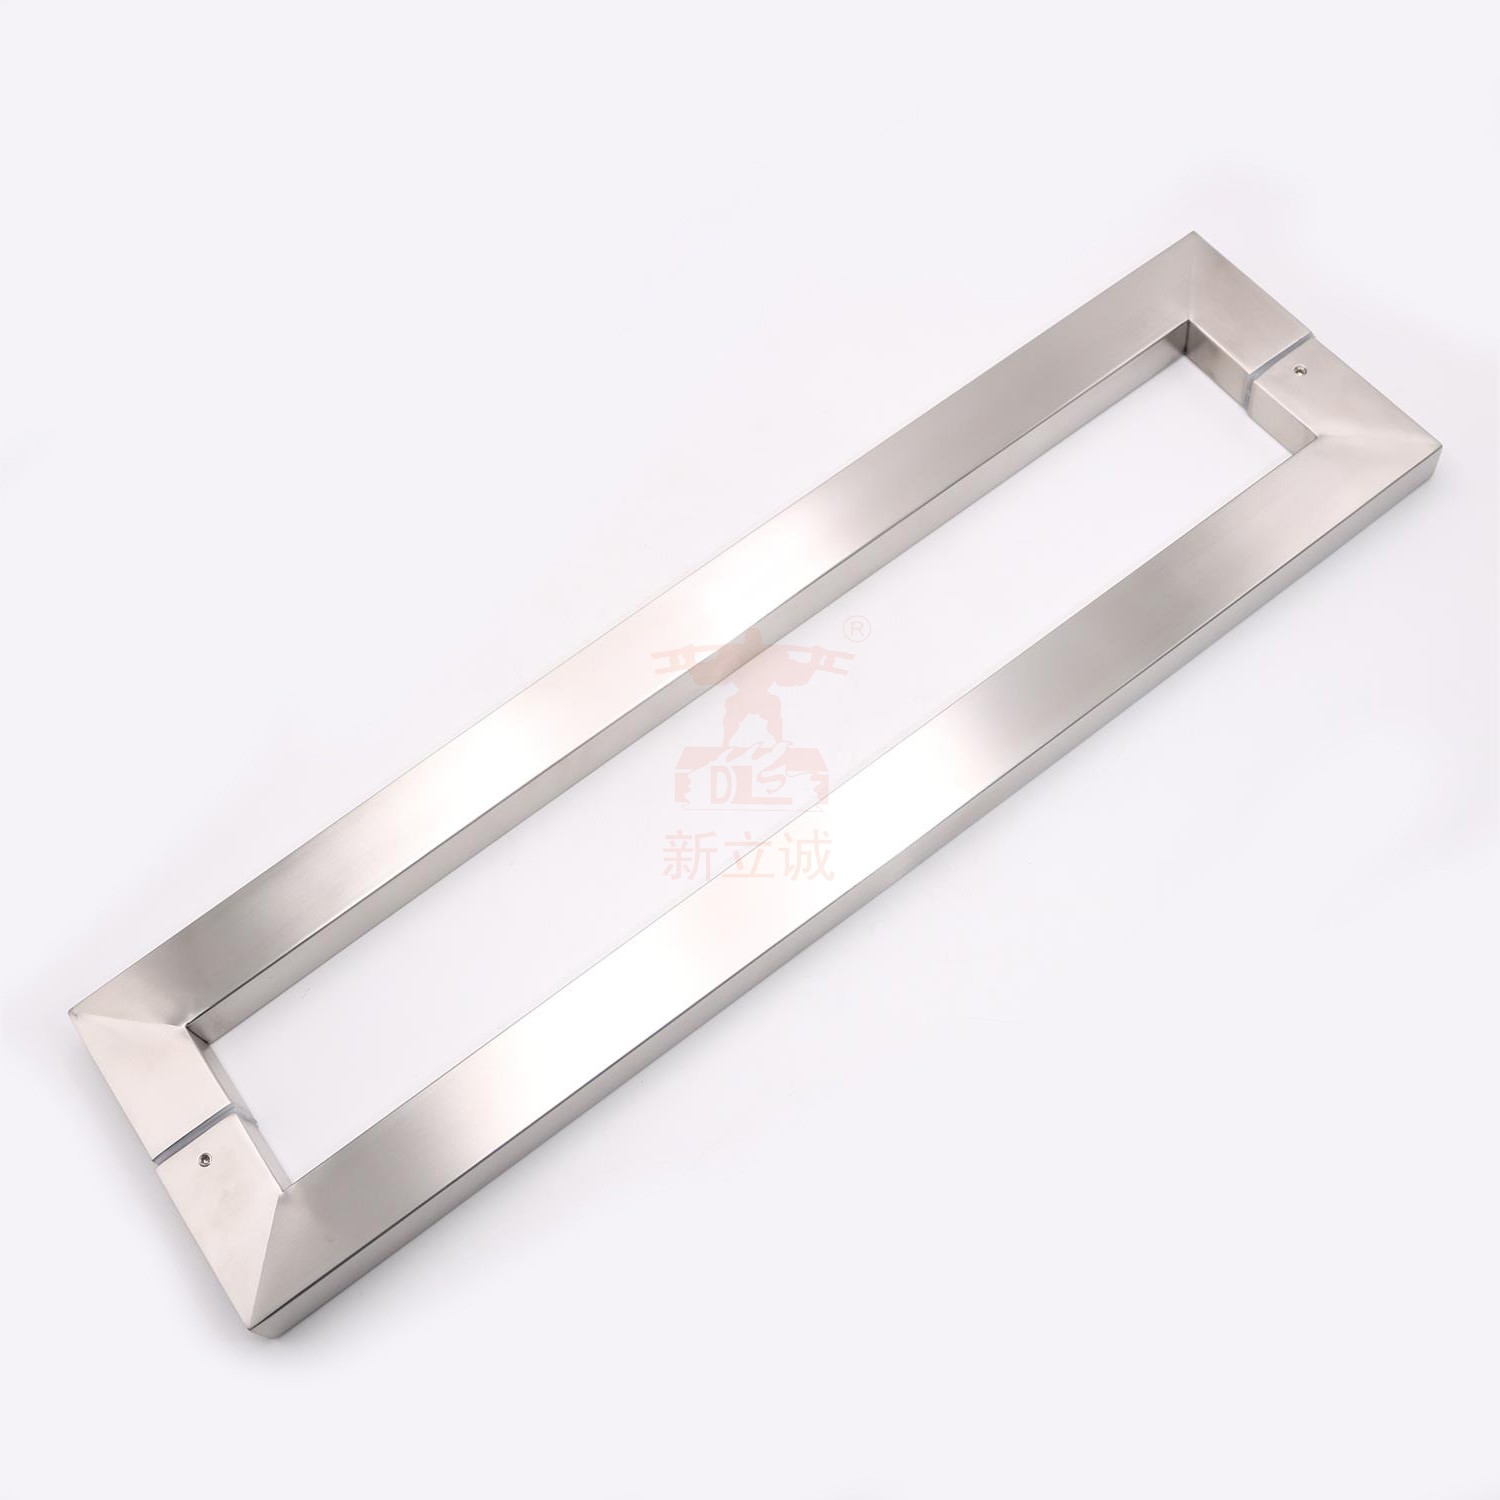 RONGYAO-6035 Stainless Steel Modern Design Glass Door Handles | H Shape Stainless-2